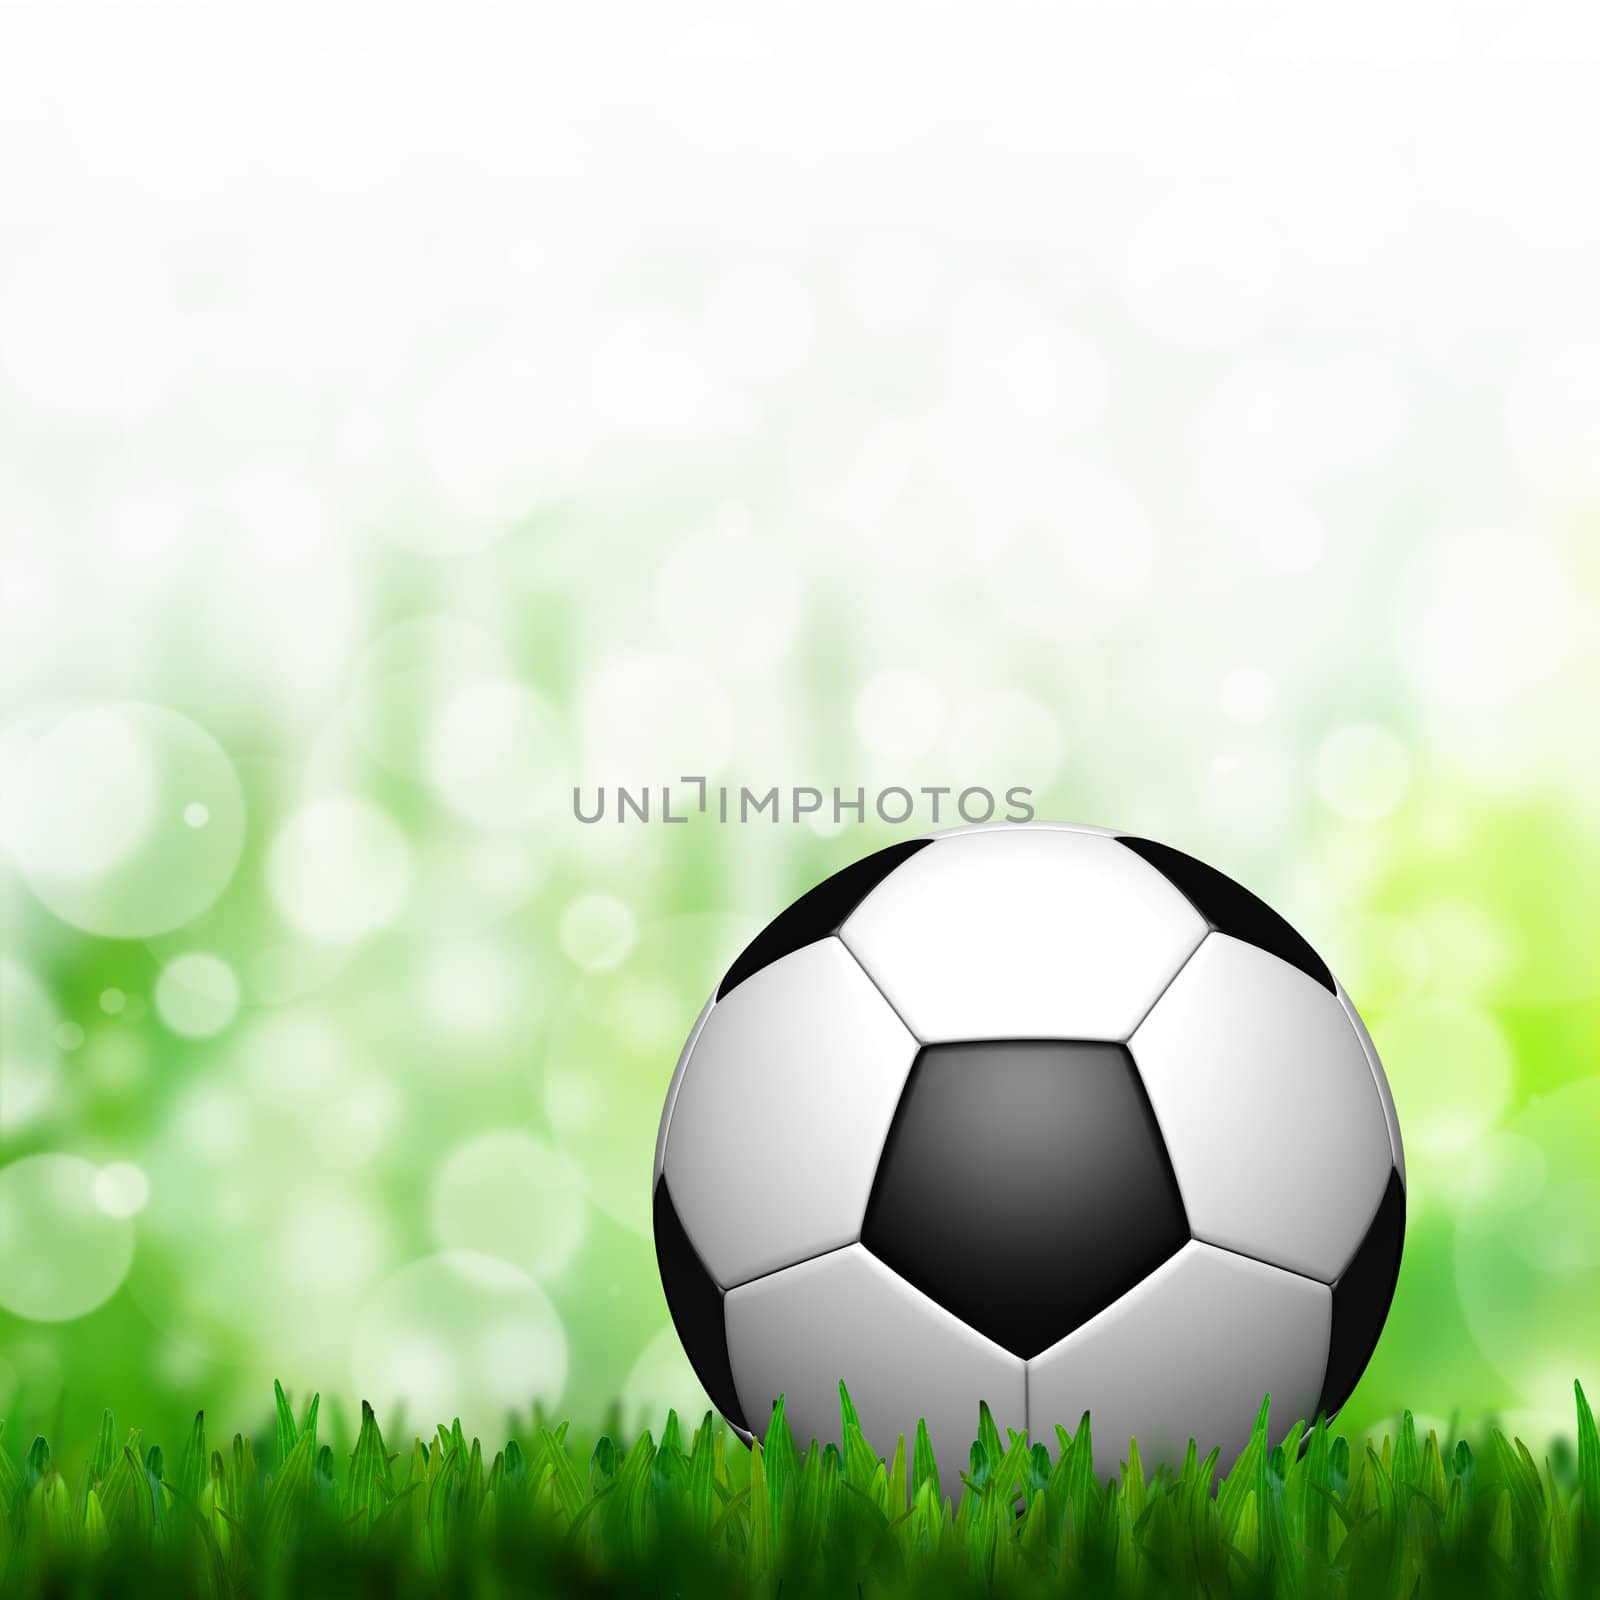 3D Football in green grass and background by jakgree